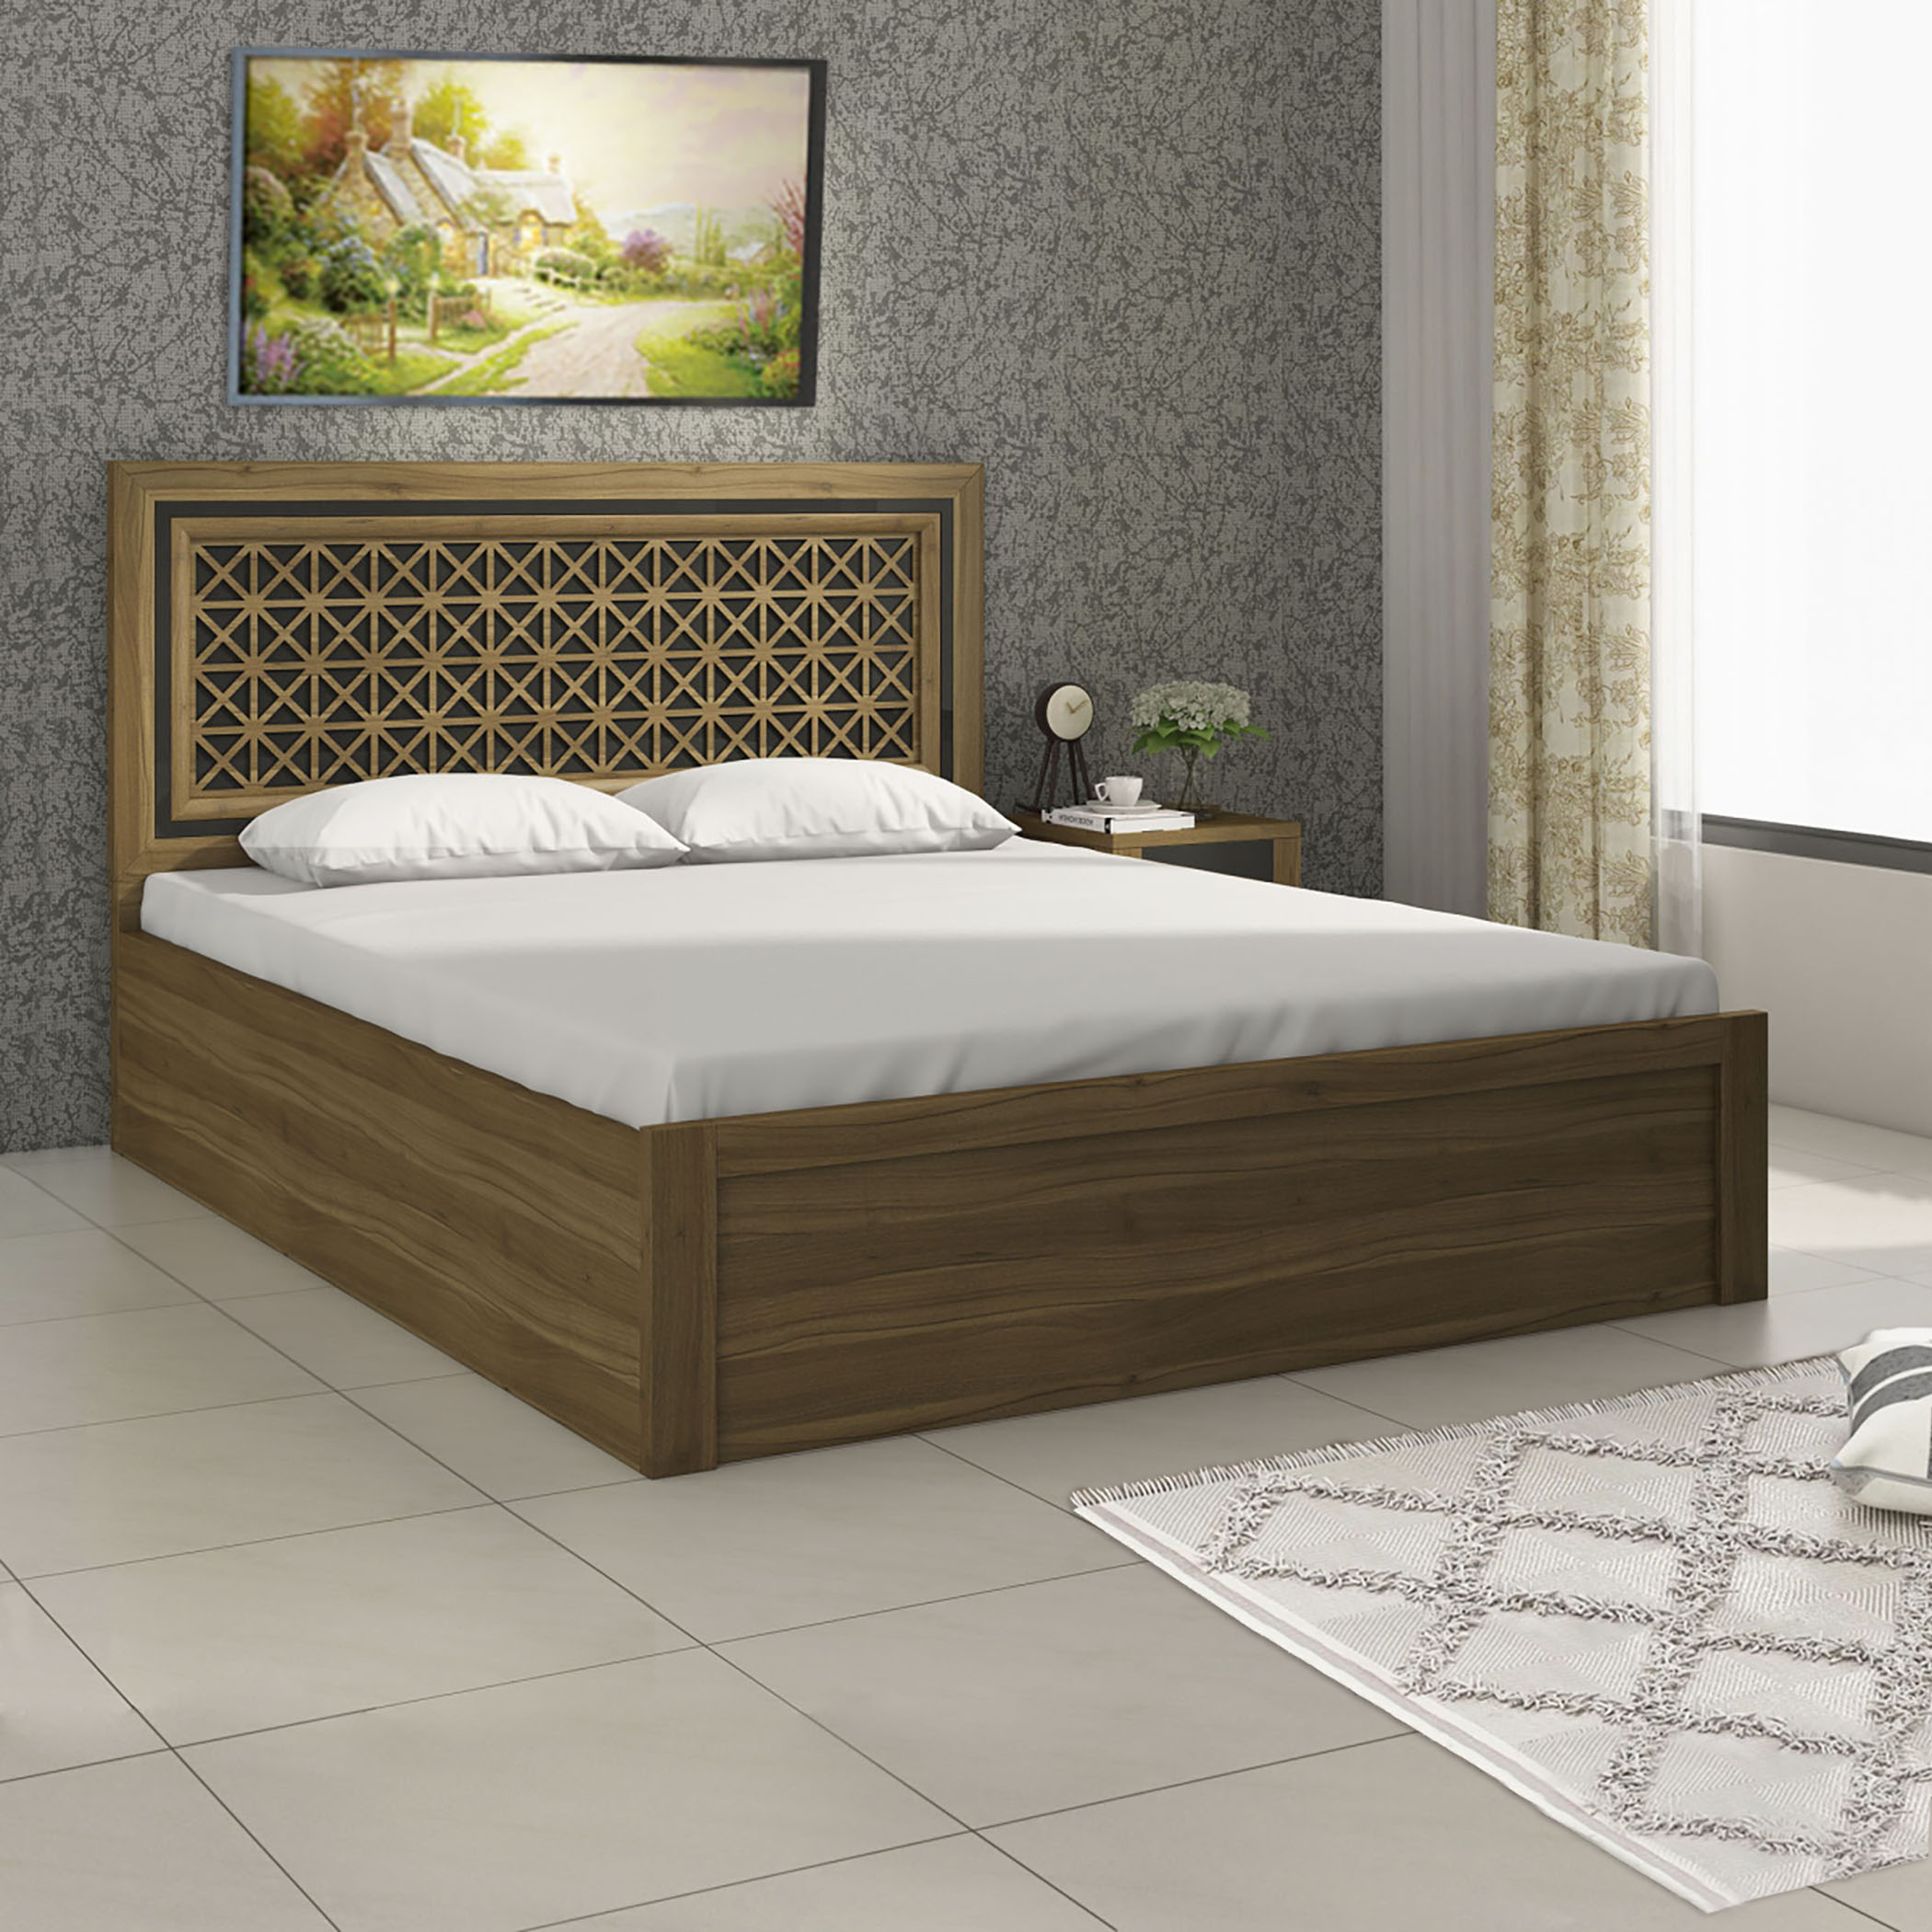 Quadro Craft Queen Bed with Box Storage - Brown